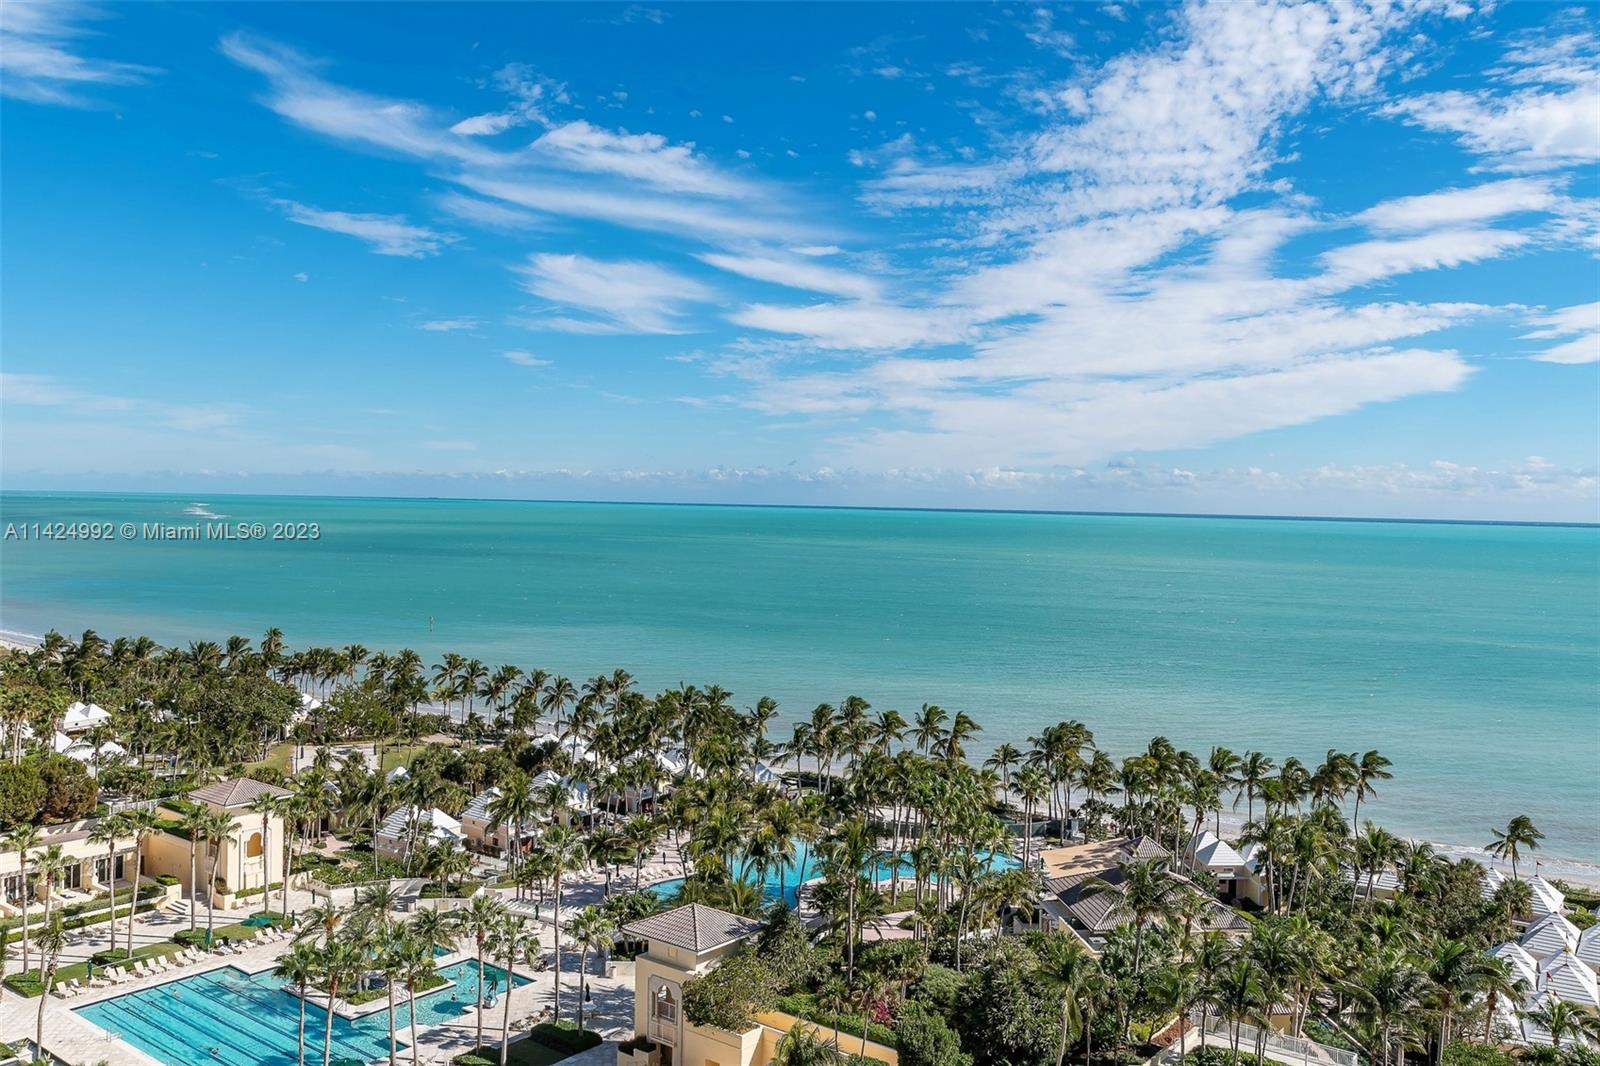 Step out from your private elevator into this elegant, newly remodeled in 2020, island retreat with sweeping floor-thru views of Atlantic Ocean and Biscayne Bay. Sunrises, sunsets, and moonrises forever! Ideal as a second home or for full-time Key Biscayne living. Move-in ready convenience. Smartly reconfigured with an open kitchen, stunning bathrooms, oversized primary closet, and wood porcelain flooring throughout. New AC and slim line vents. Ocean Tower I is closest to the beach and Ocean Club amenities! Ocean Club offers resort-style family living with a private & newly remodeled Beach Club, poolside restaurants, fitness center, spa & beauty salon, Tennis Club & more! Available to sell separately is Hobby Room #17 w/ full bathroom.